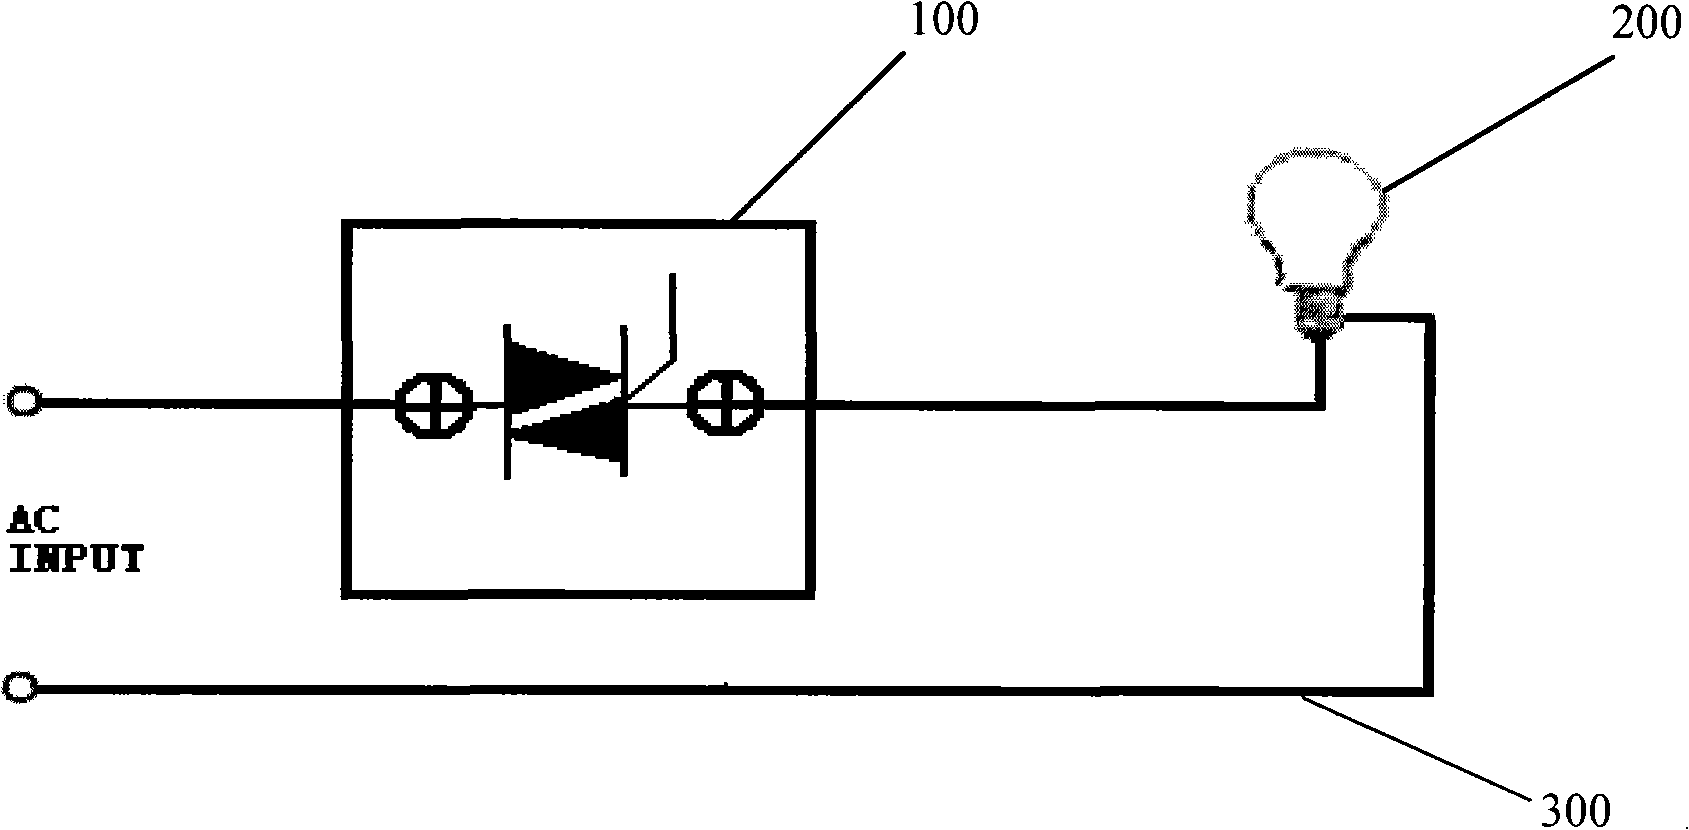 Electronic ballast and general lamp seat having the same